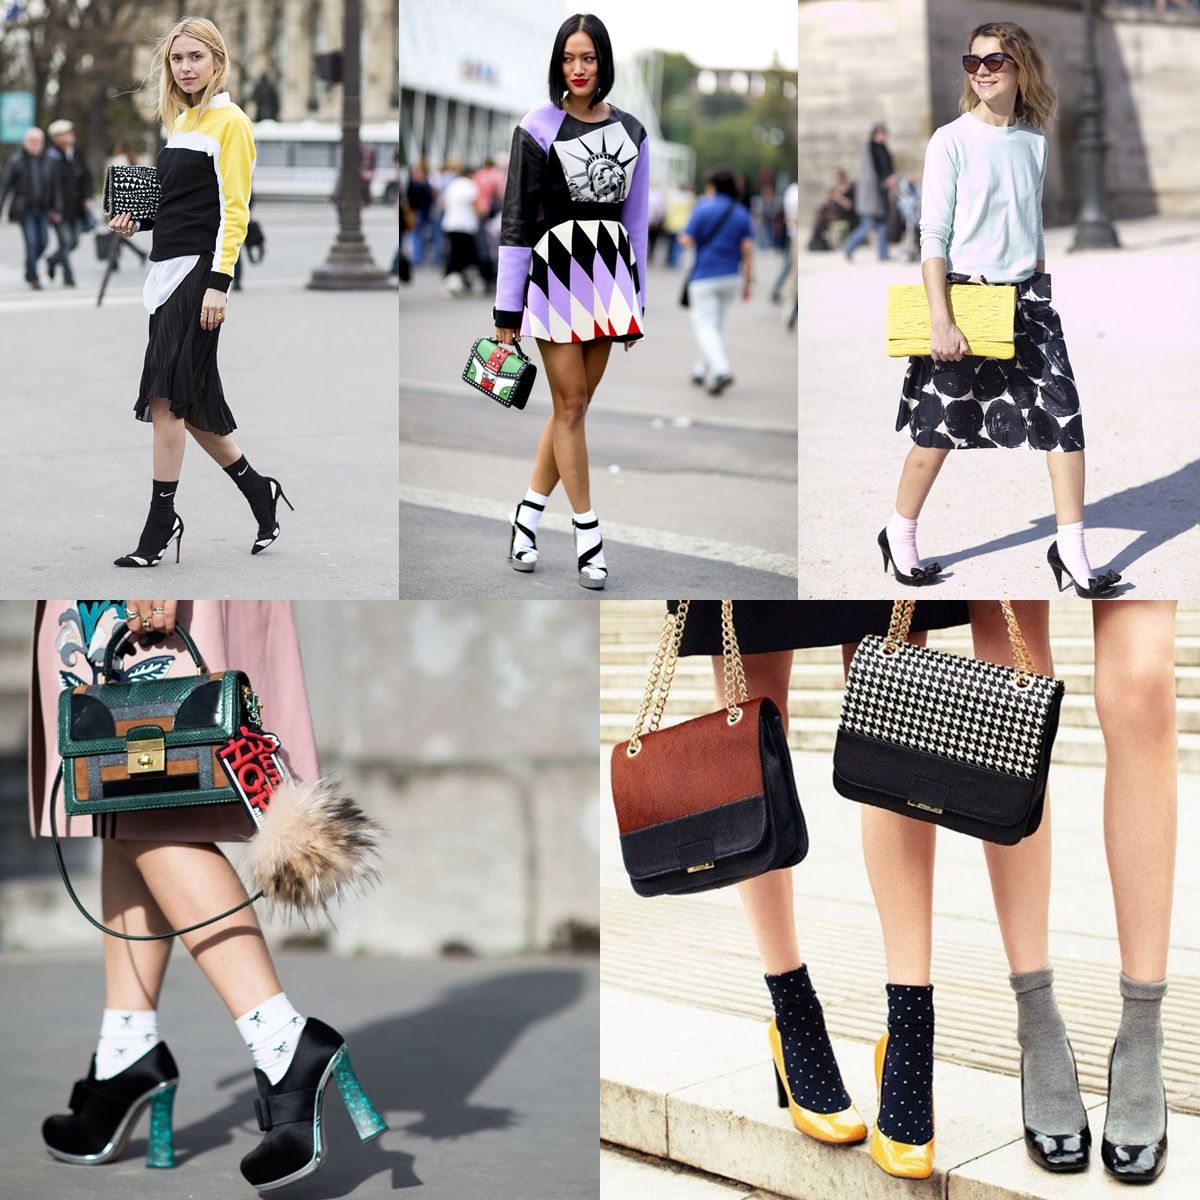 Heels & Socks.  The 80's Trend is back with a more updated look